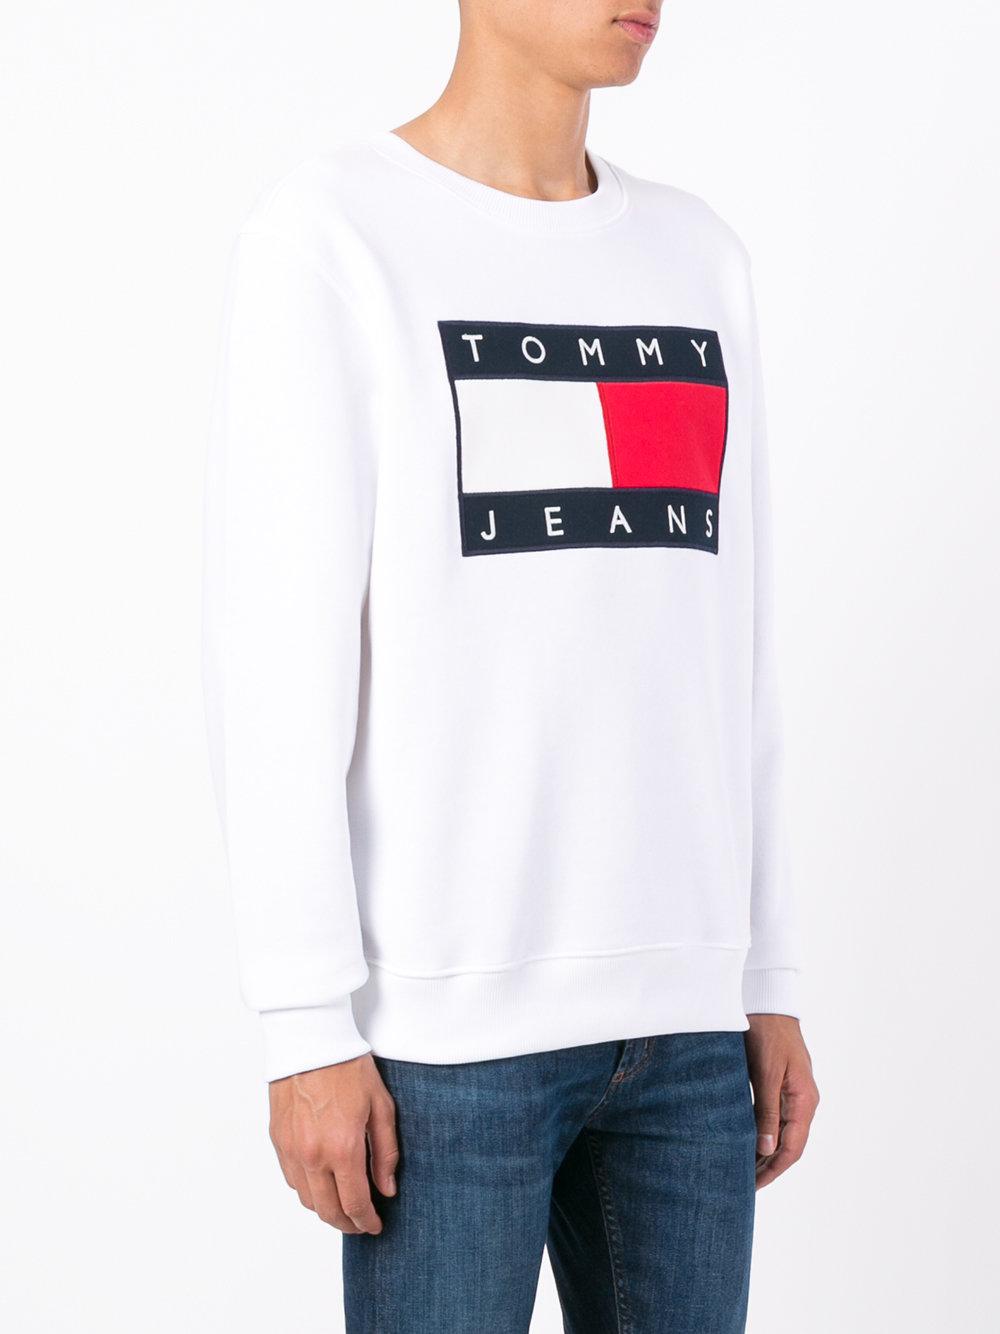 Lyst - Tommy Hilfiger Classic Logo Printed Sweatshirt in White for Men